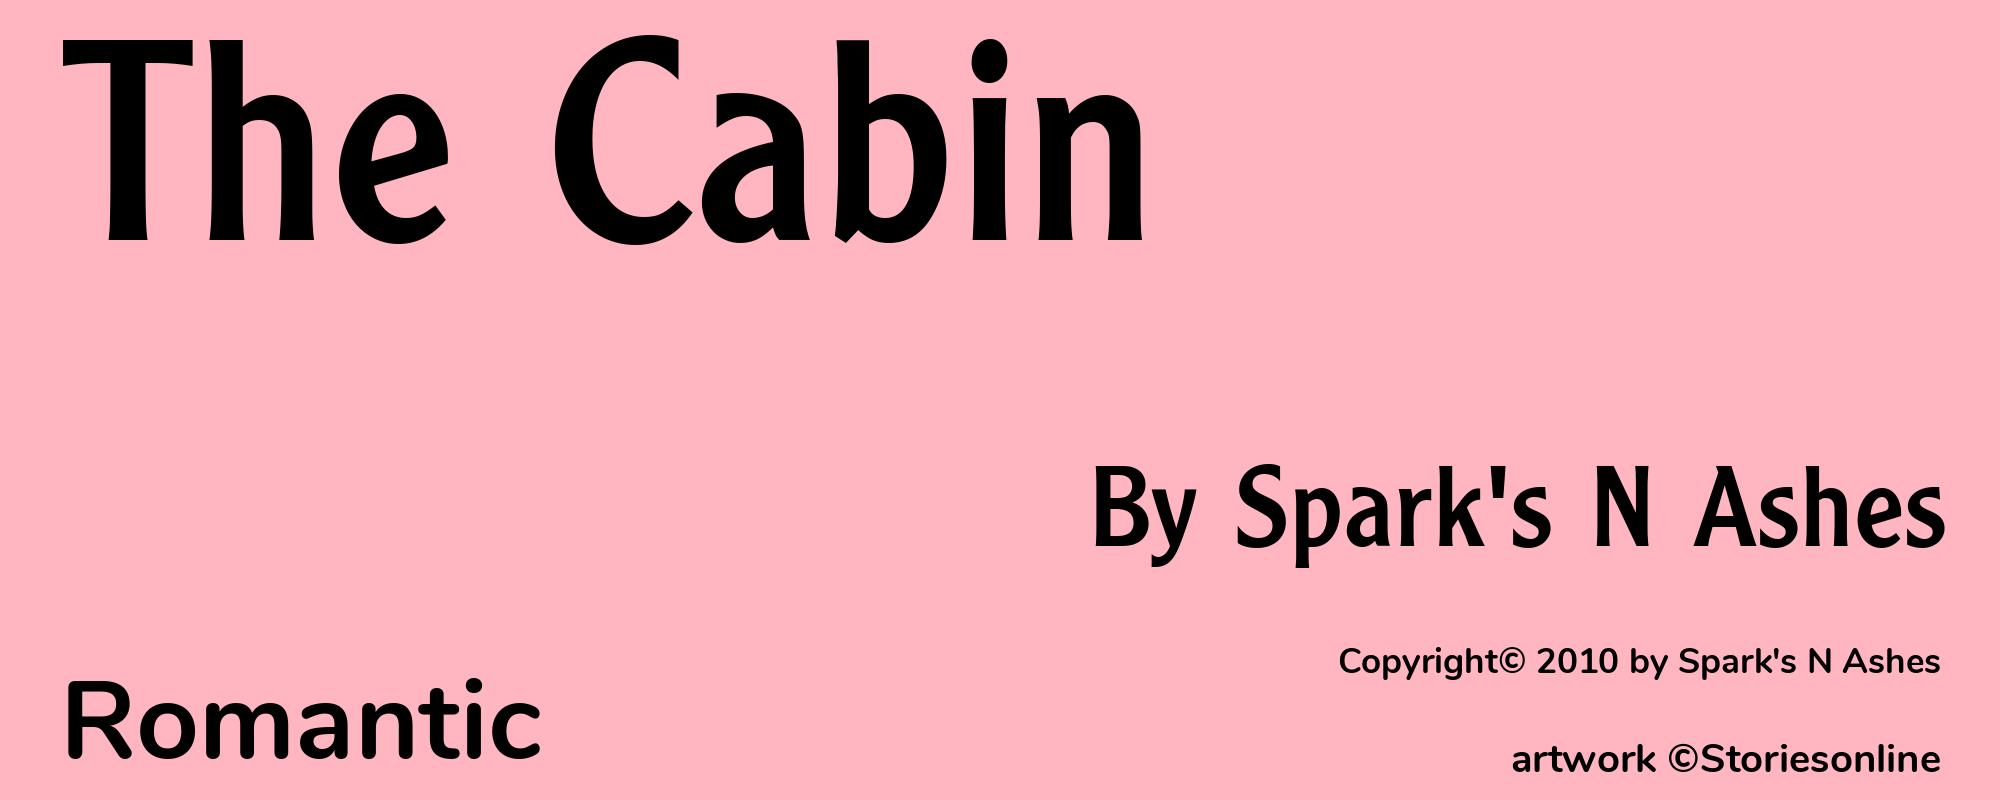 The Cabin - Cover